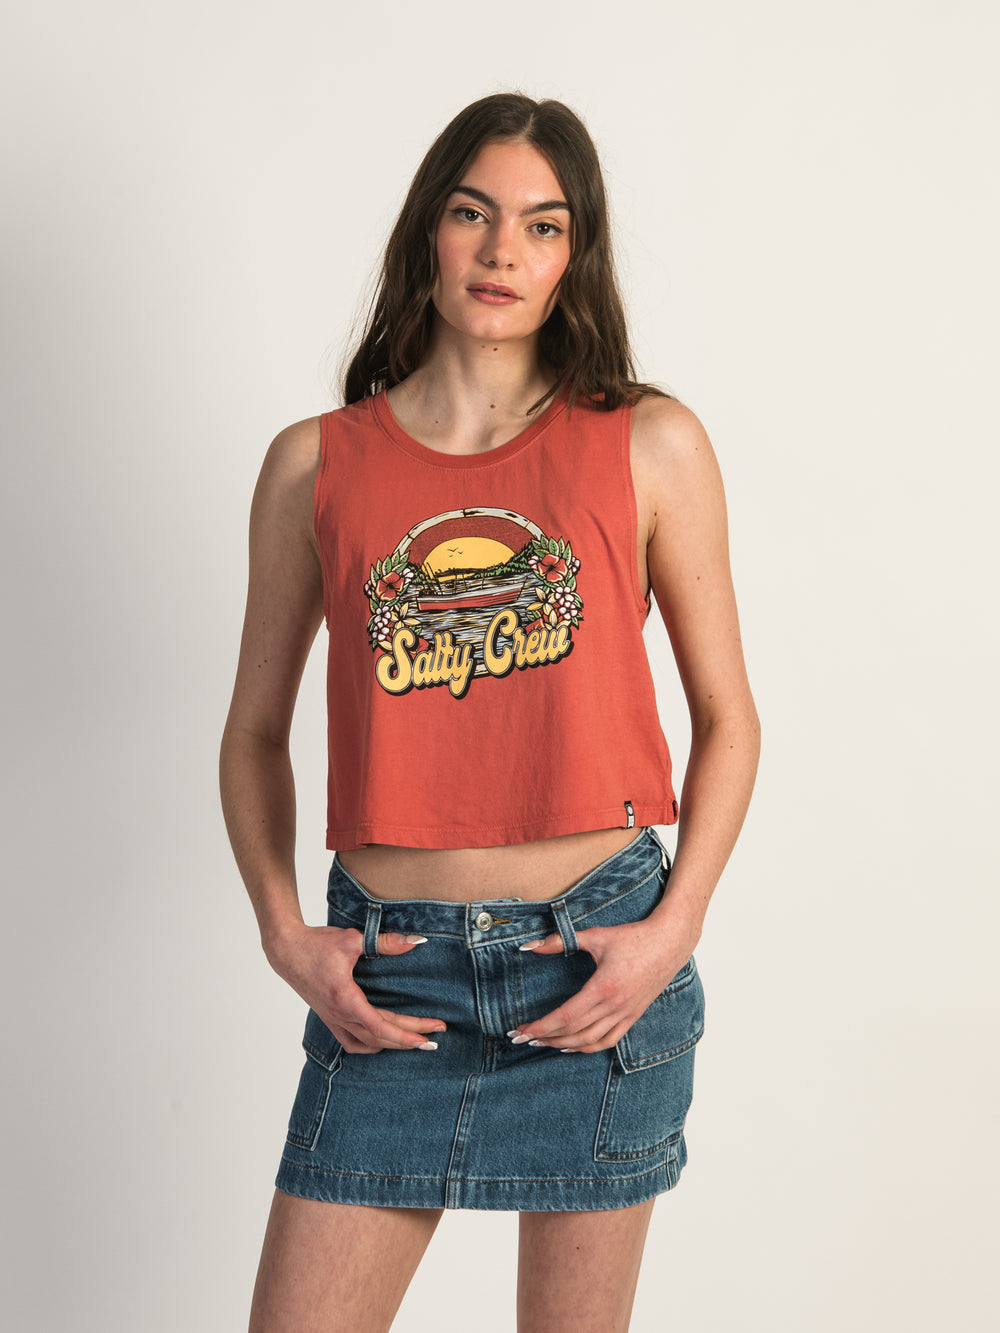 SALTY CREW ON VACATION CROPPED TANK TOP